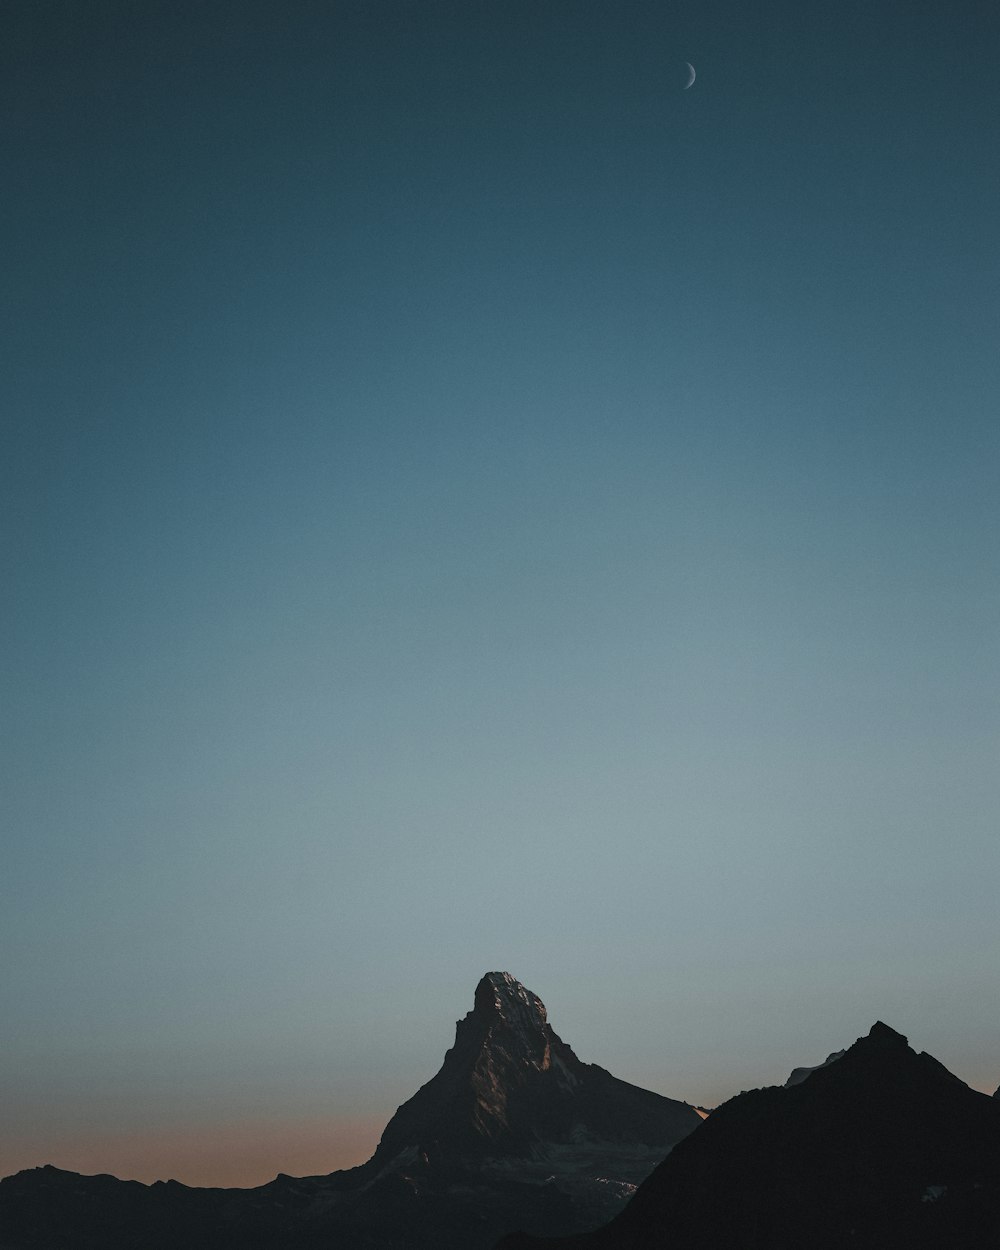 a mountain with a moon in the sky